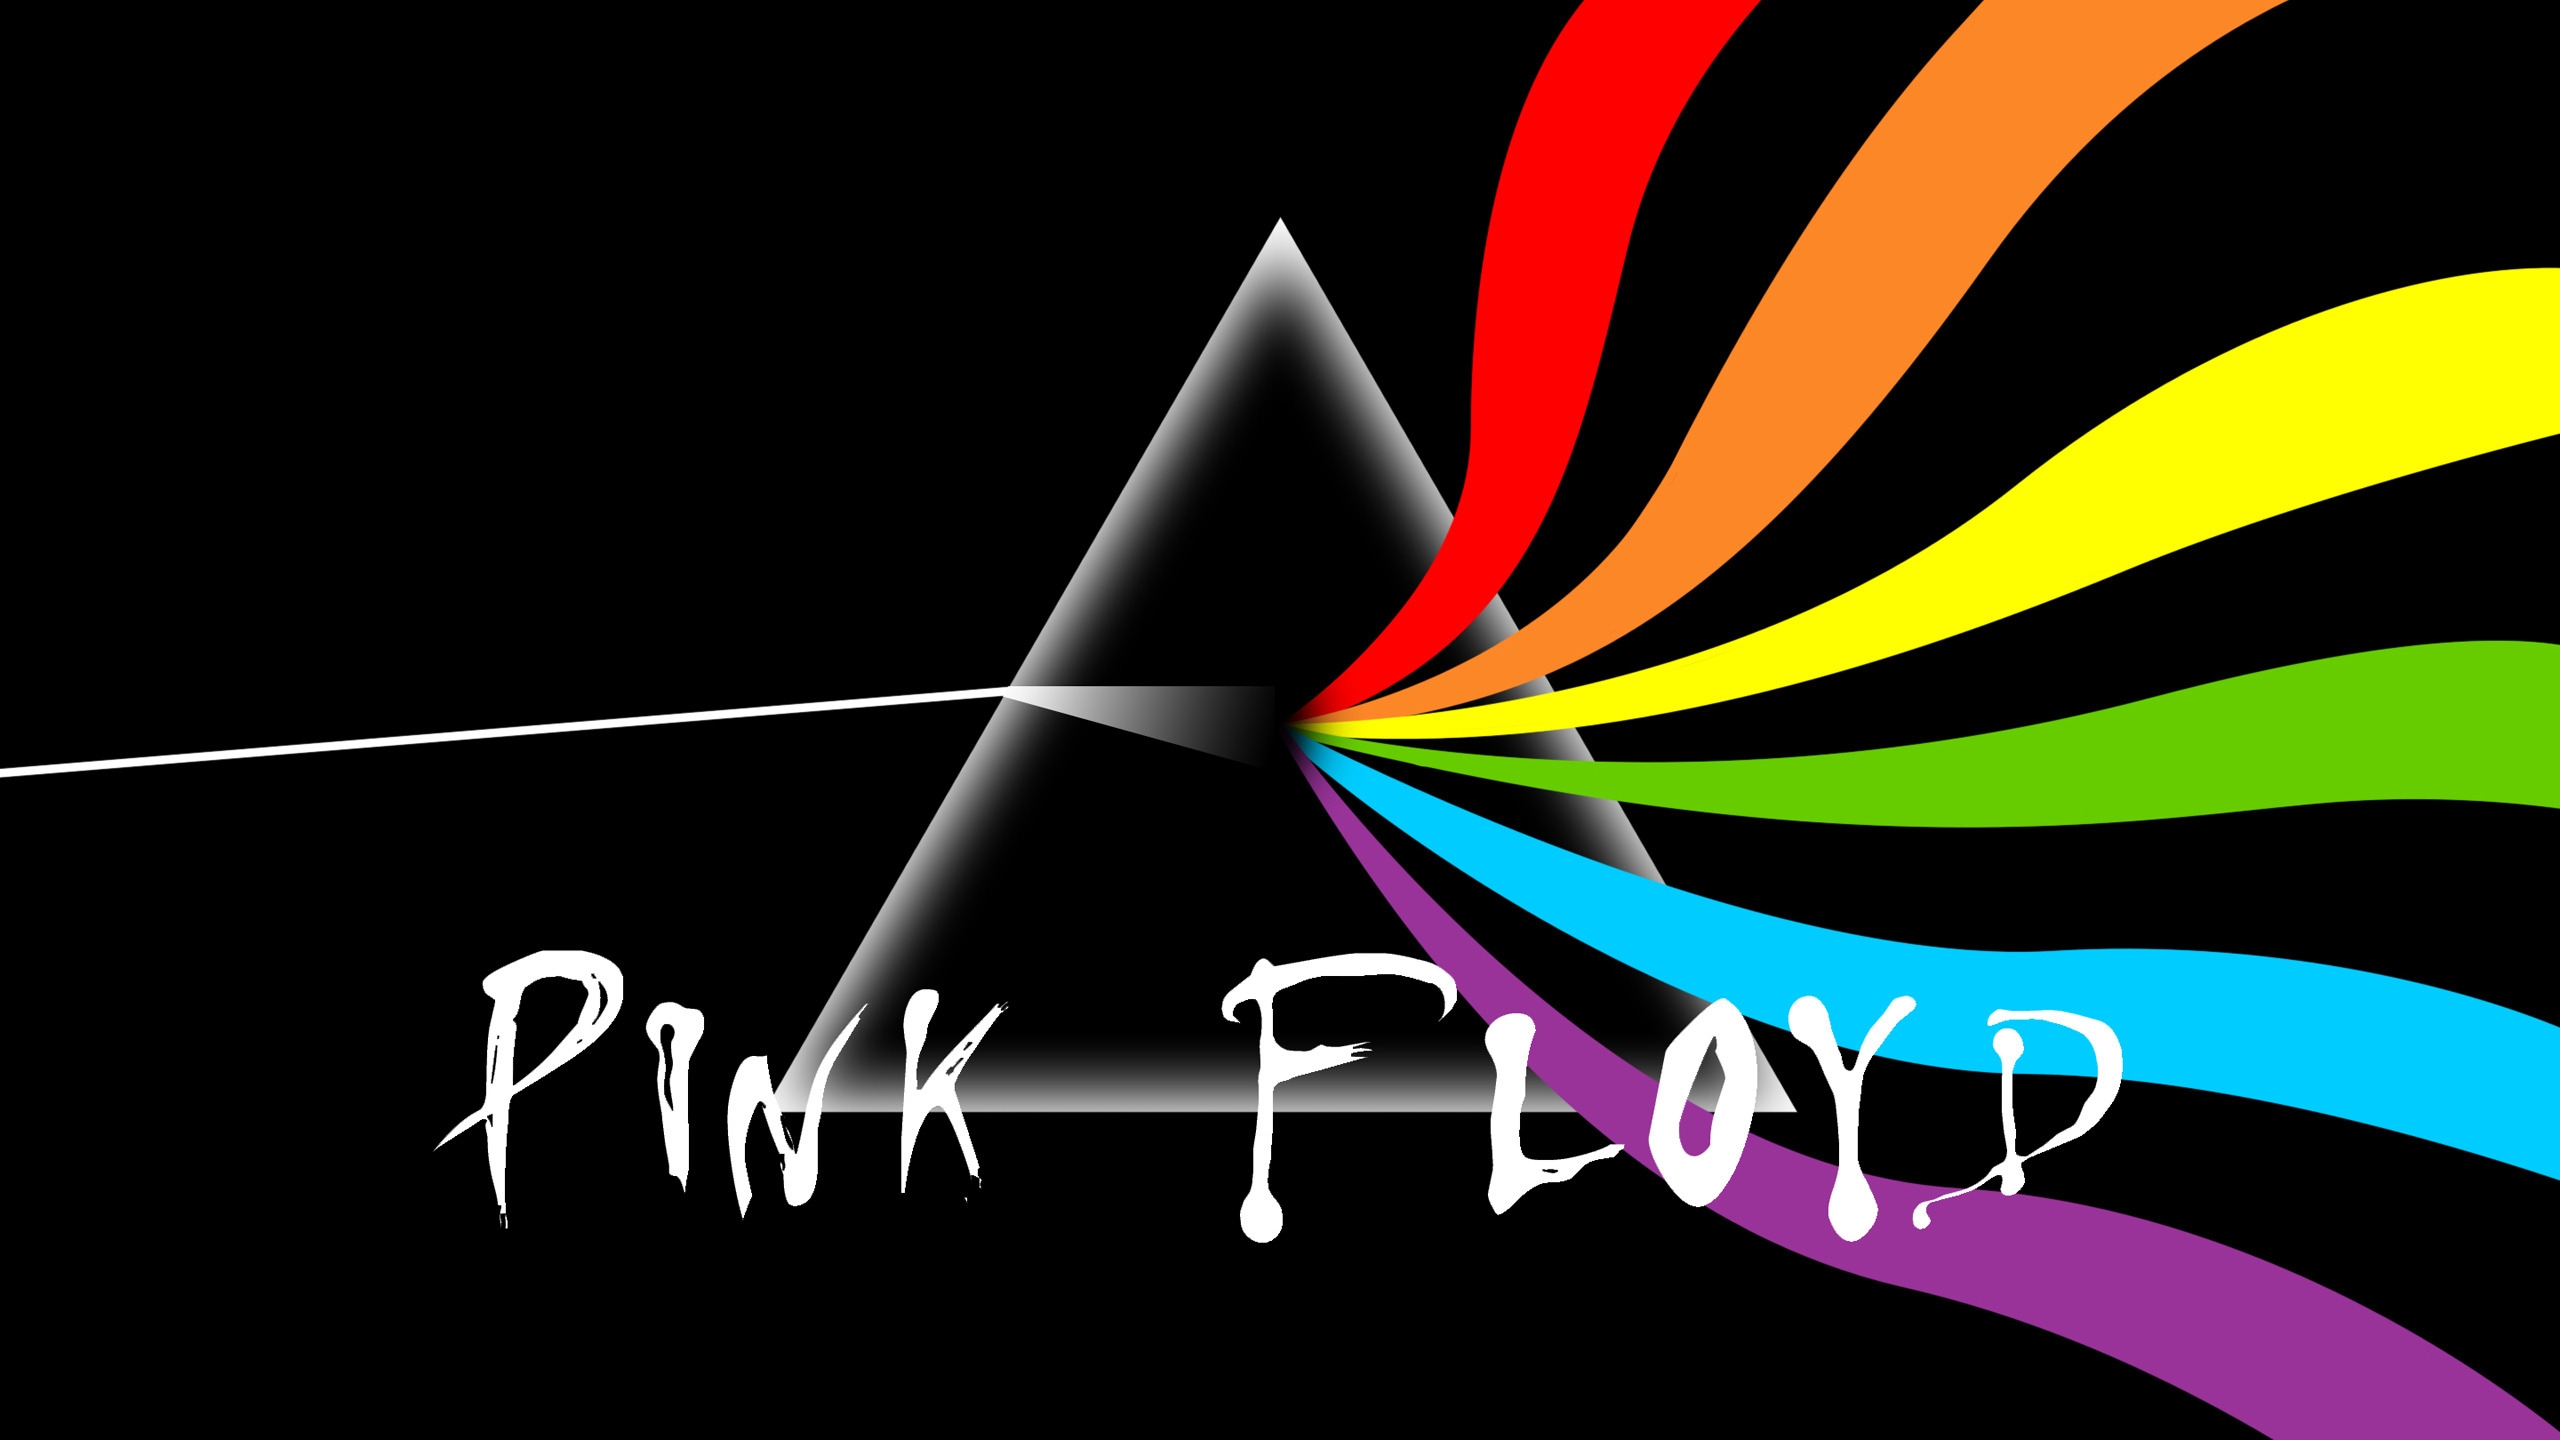 Pink Floyd for 2560x1440 HDTV resolution